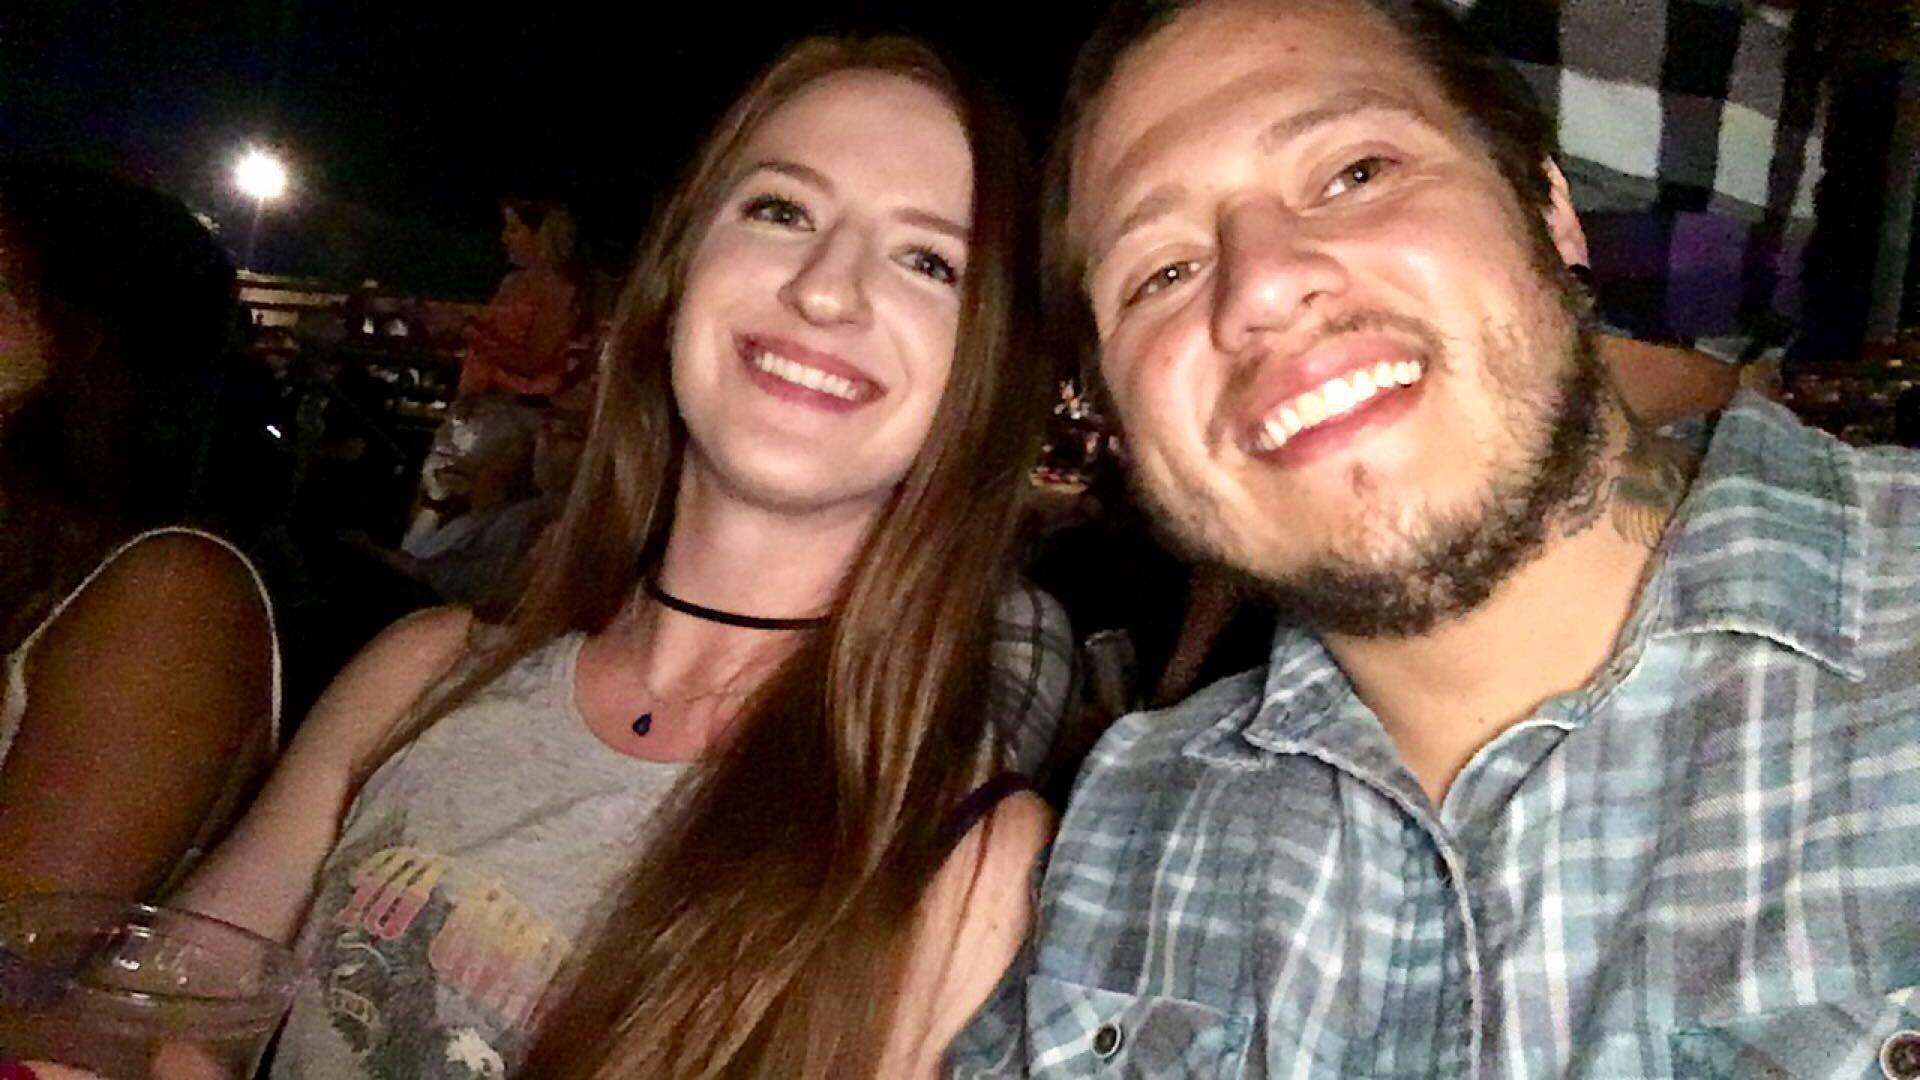 Our first "date" at the Florida Georgia Line concert!